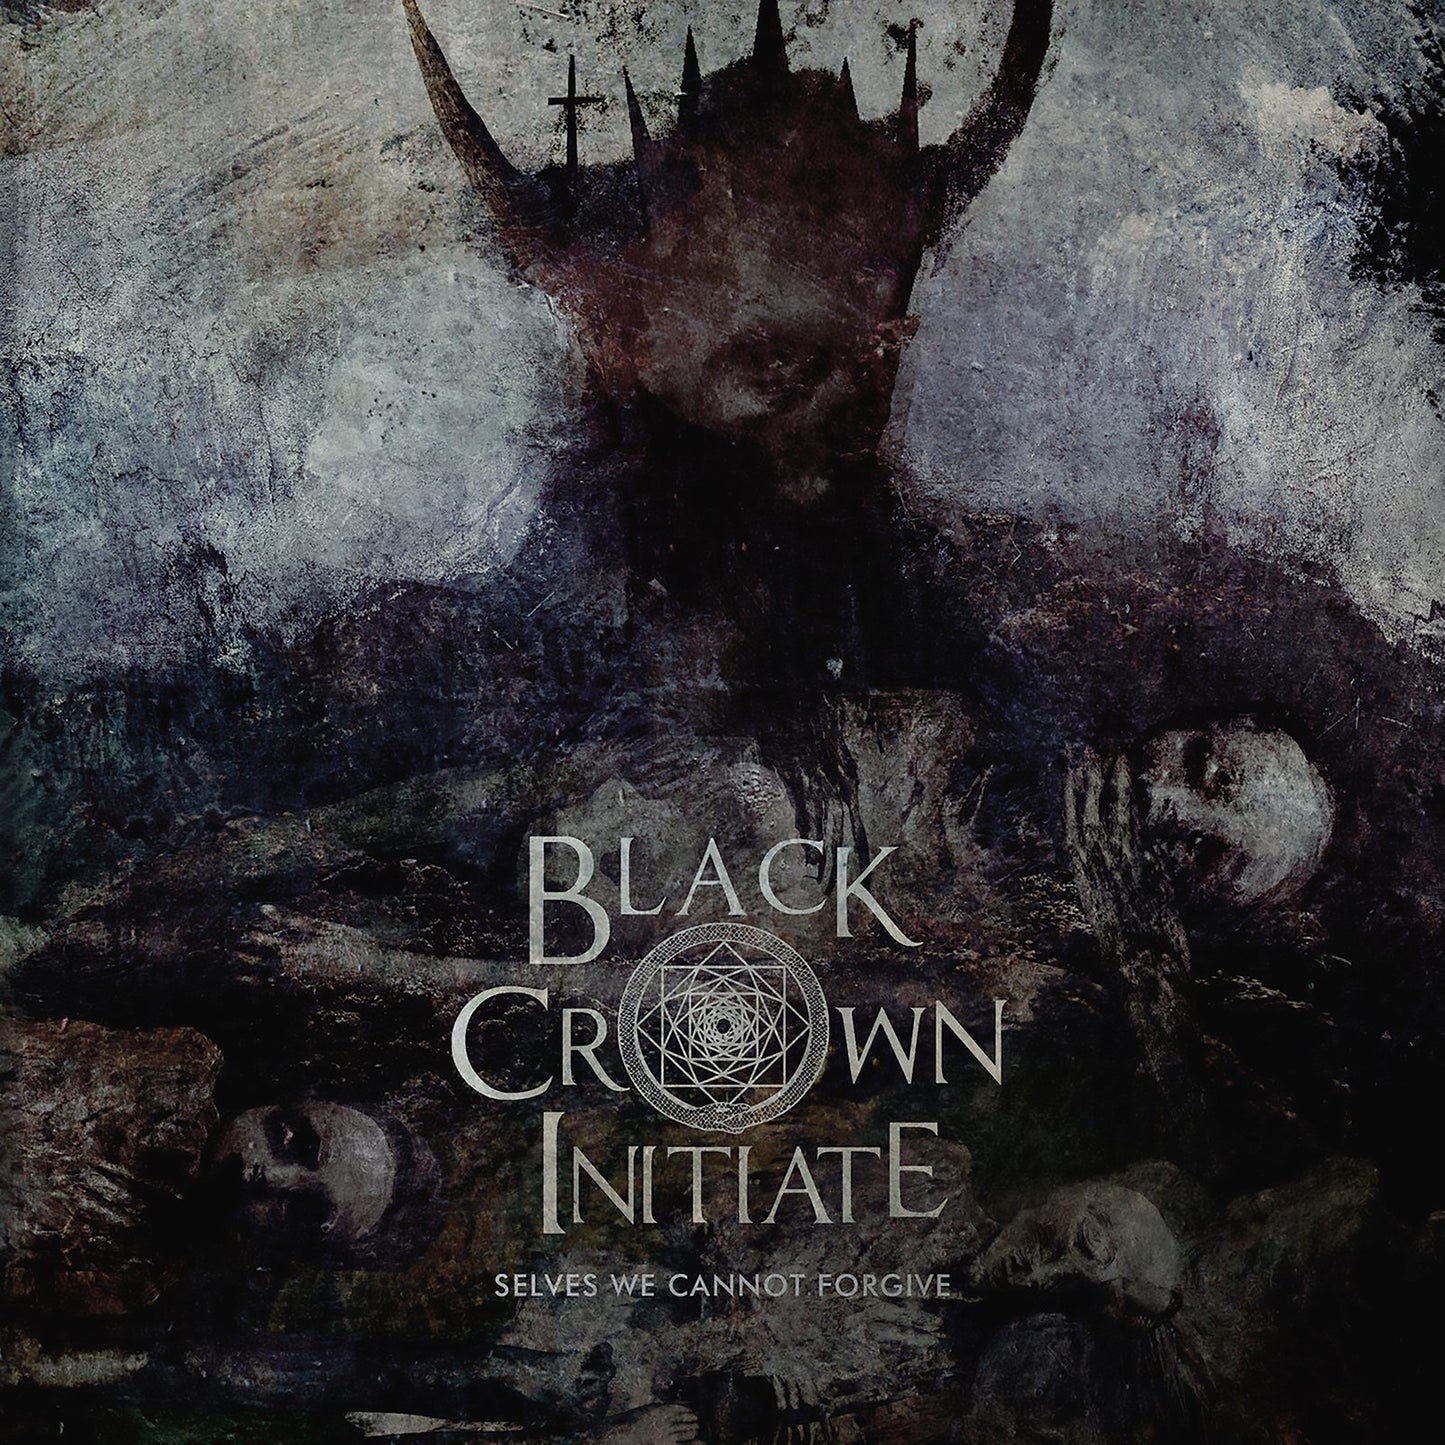 Black Crown Initiate "Selves We Cannot Forgive" CD